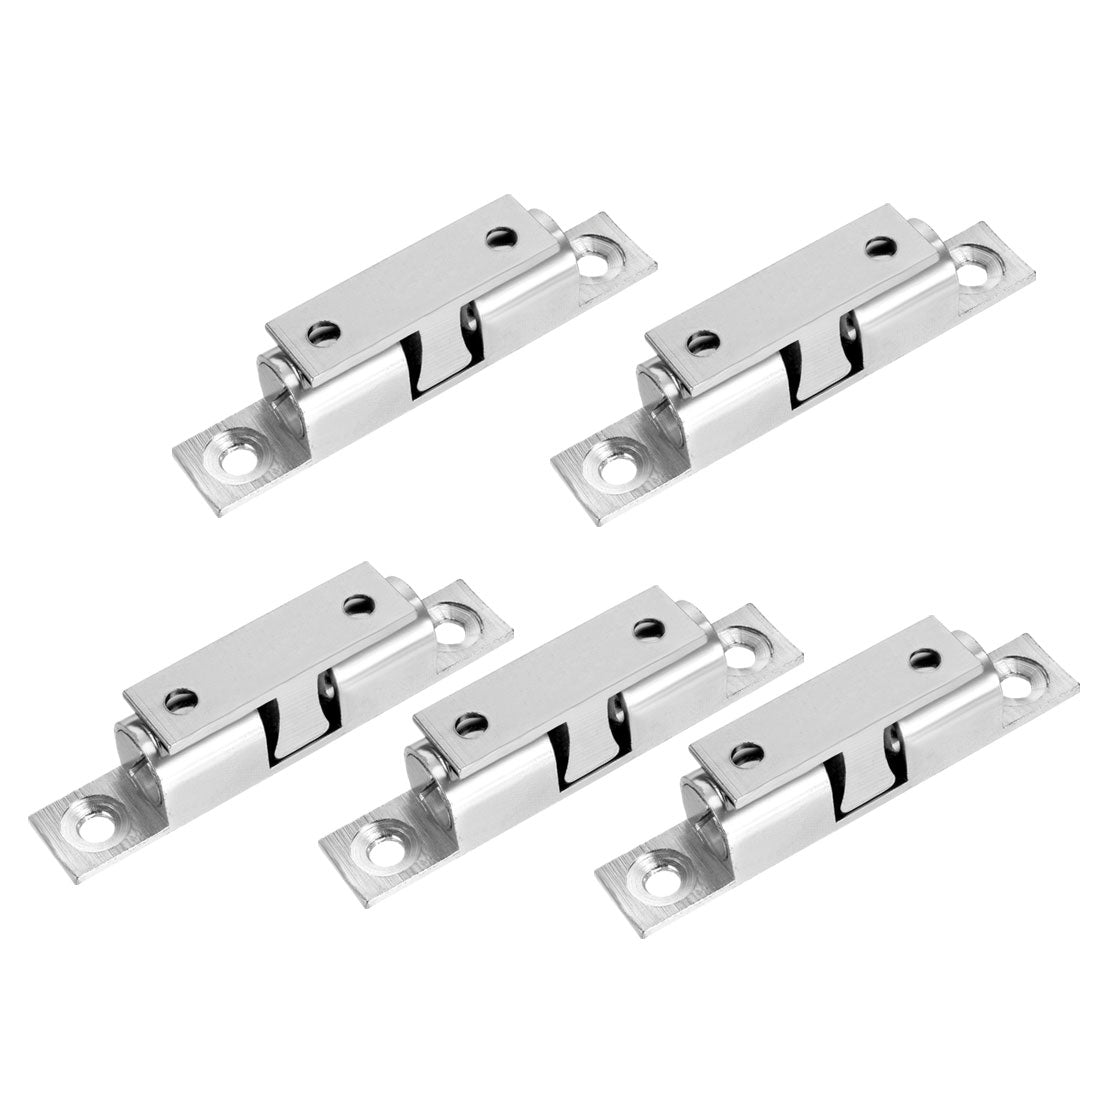 uxcell Uxcell 5pcs Cabinet Door Closet Brass Double Ball Catch Tension Latch 70mm Length Silver Tone